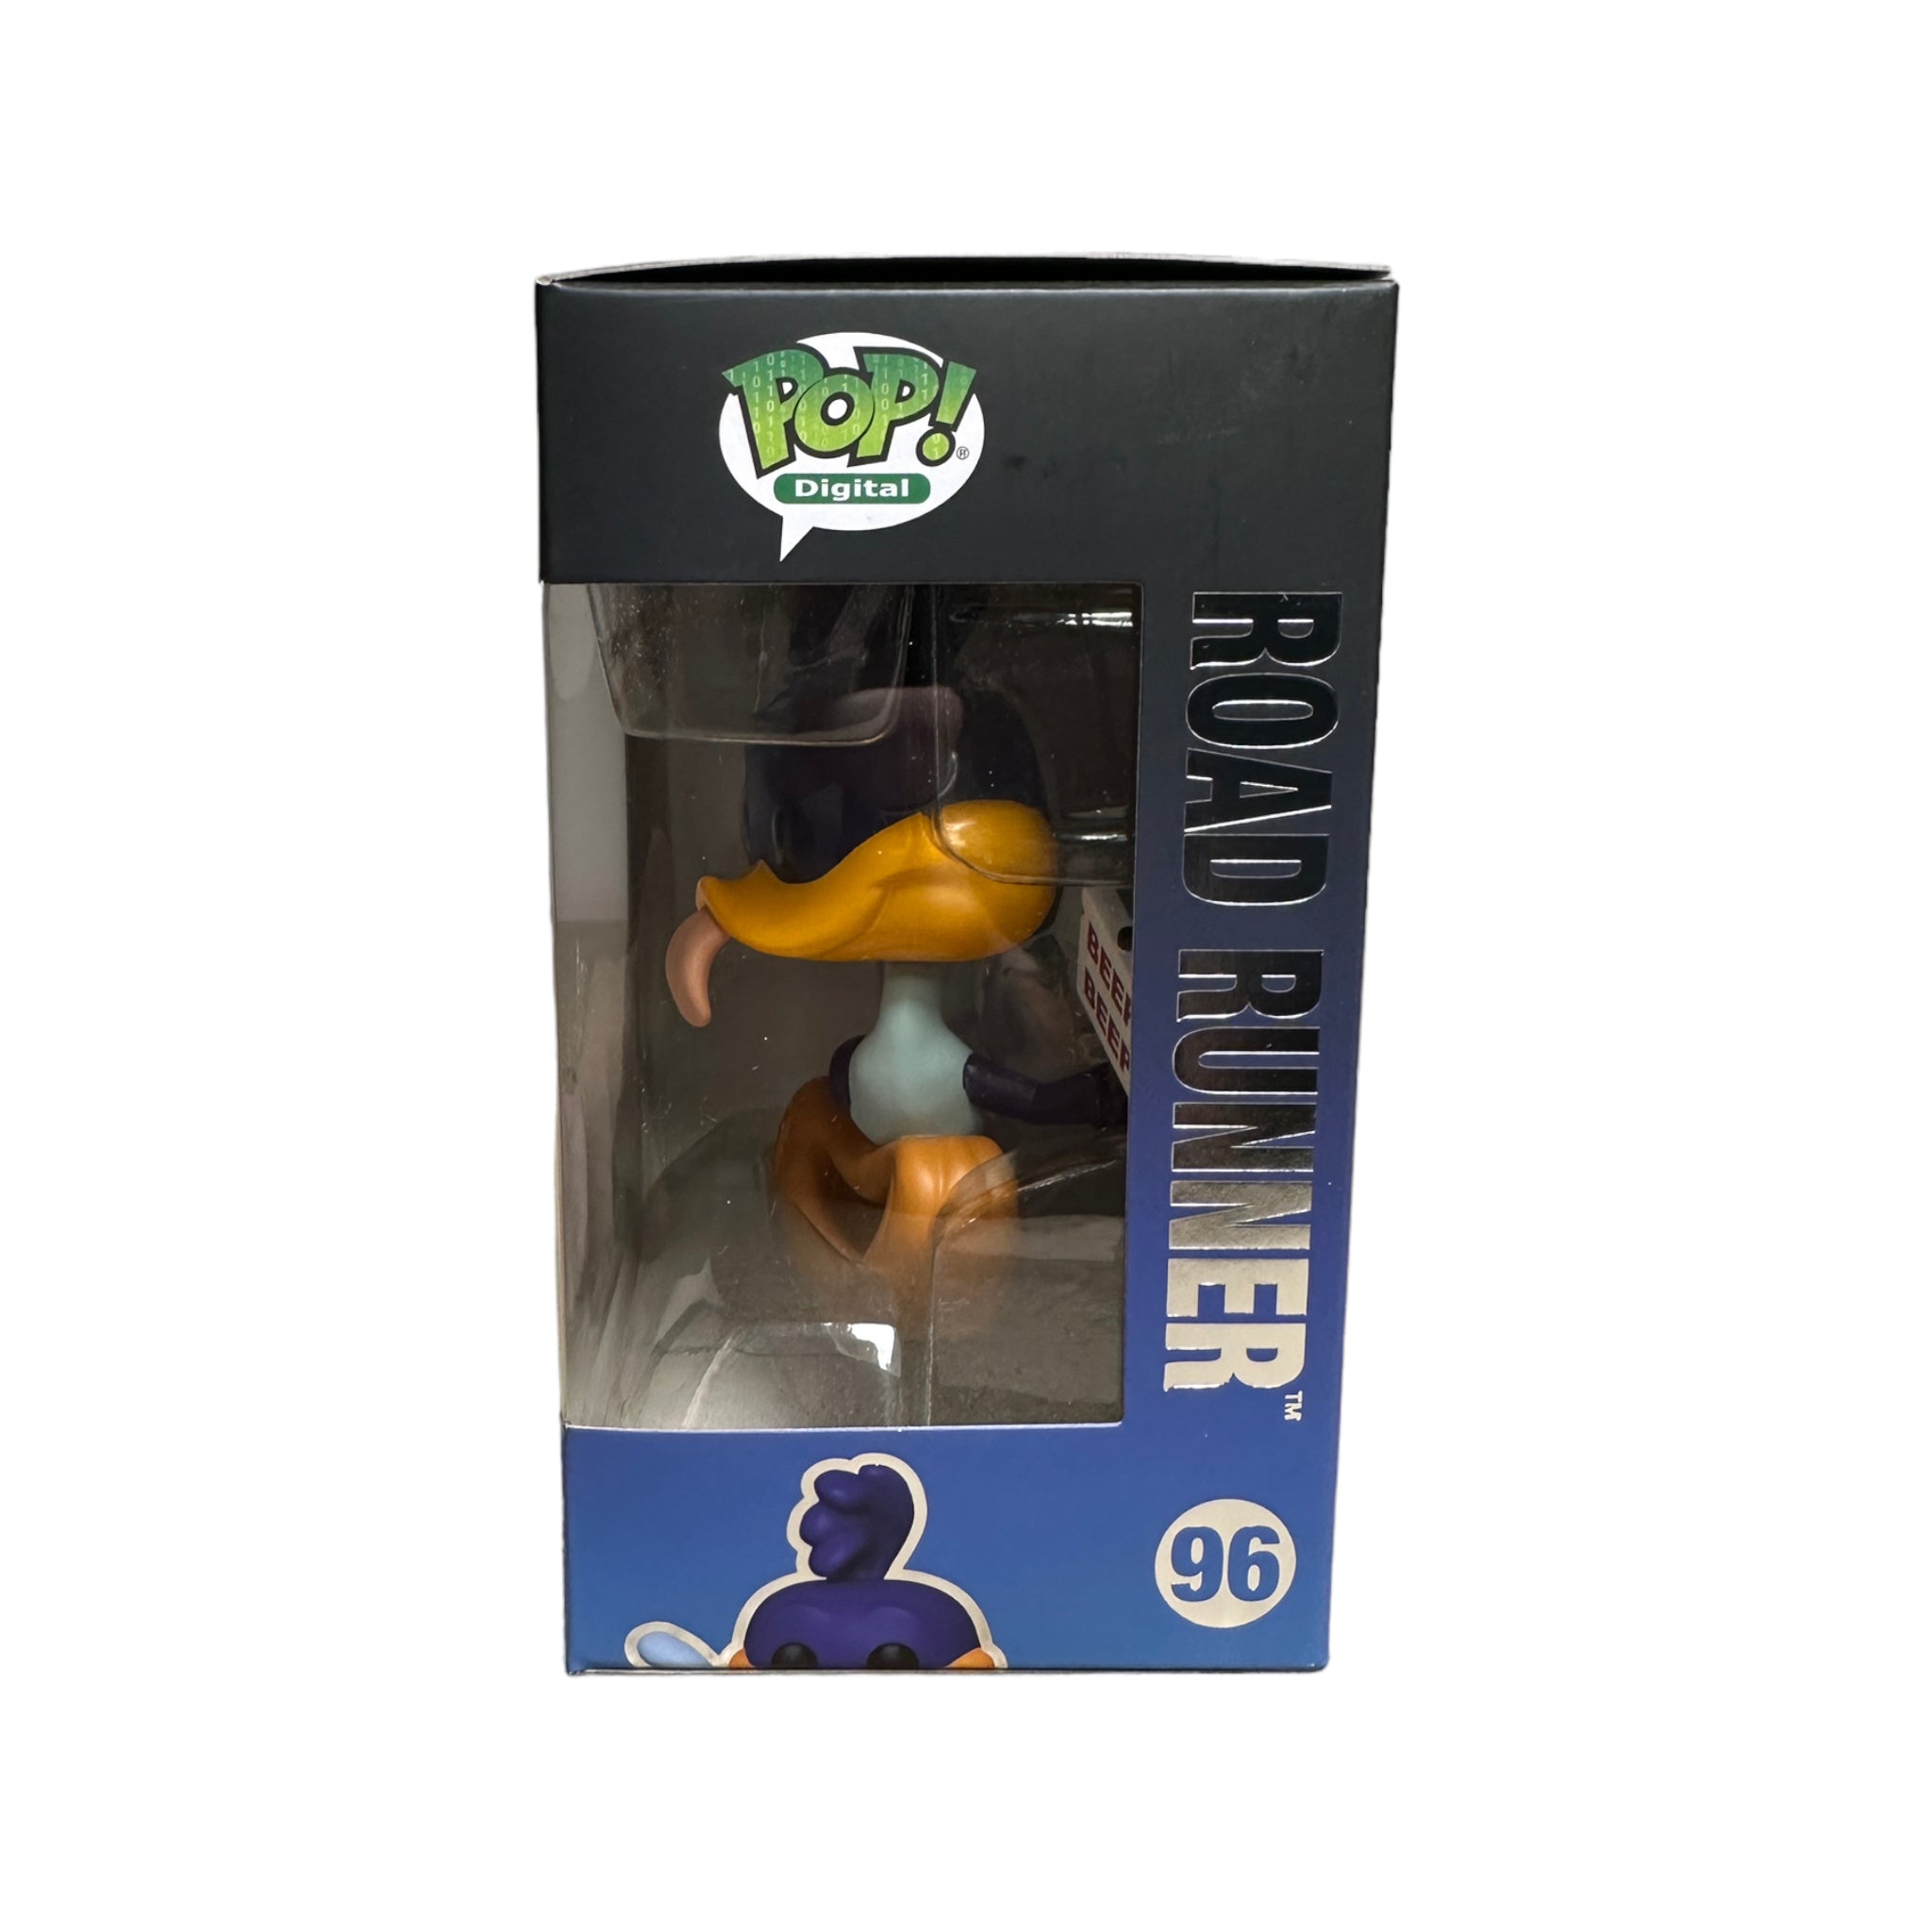 Road Runner #96 Funko Pop! - Looney Tunes - NFT Release Exclusive LE1635 Pcs - Condition 9/10